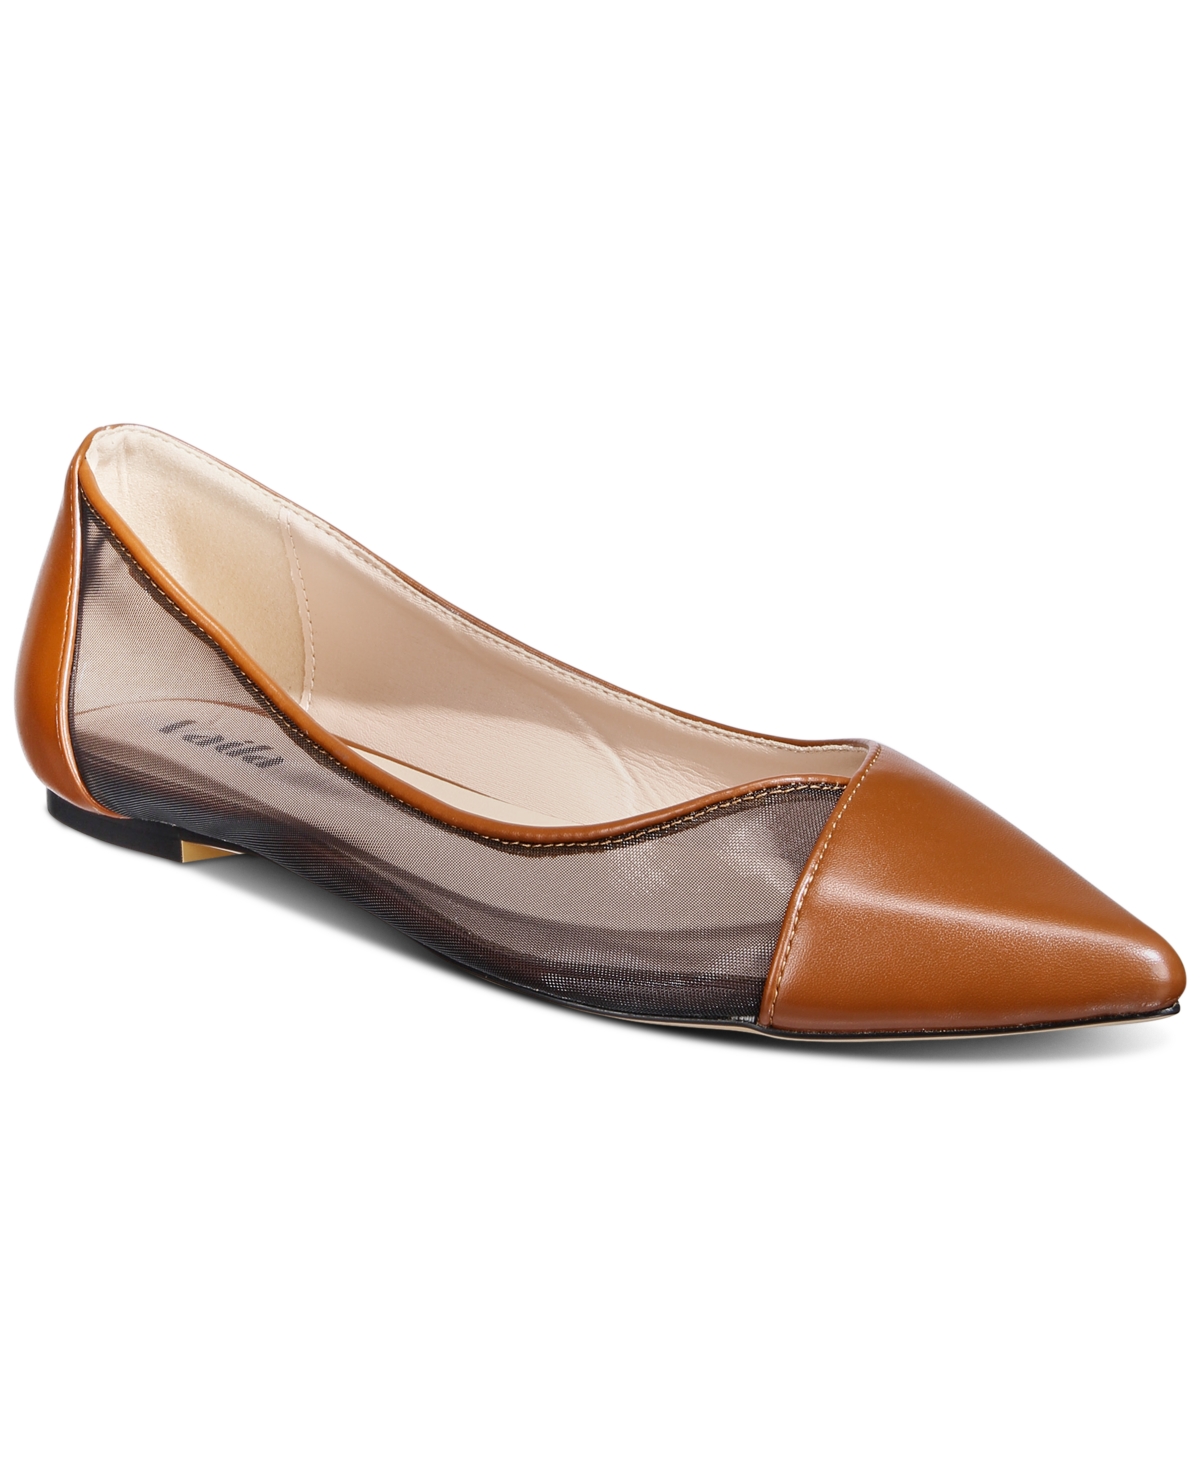 Women's Linda Pointed-Toe Flats-Extended sizes 9-14 - Brown